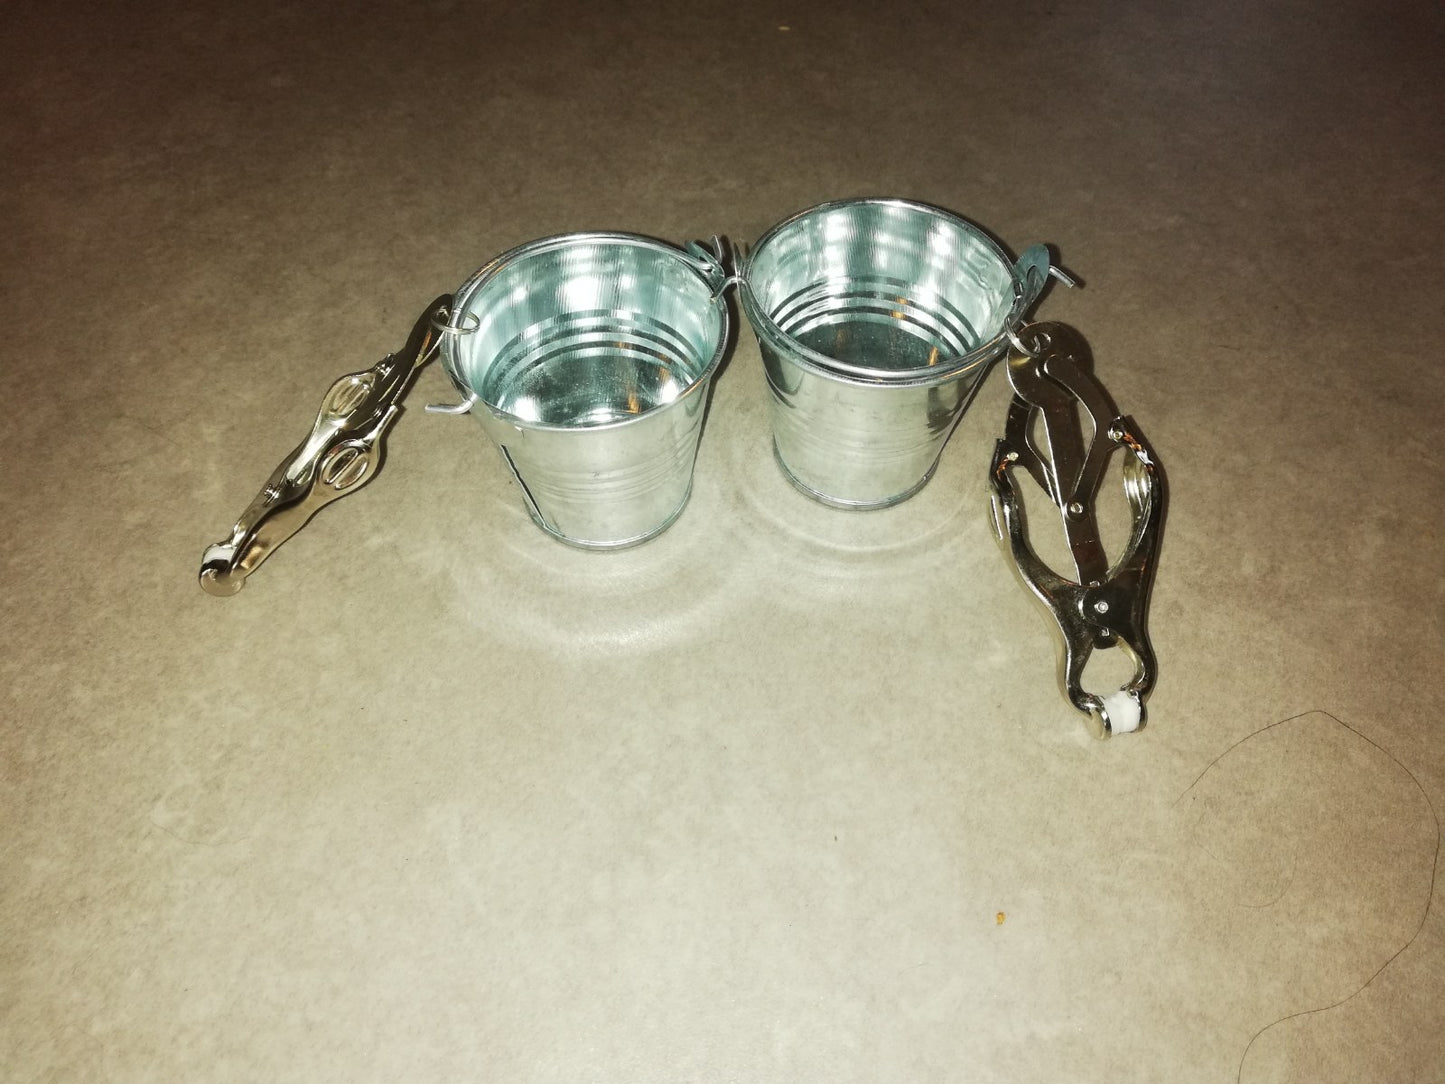 Clover clamps with buckets